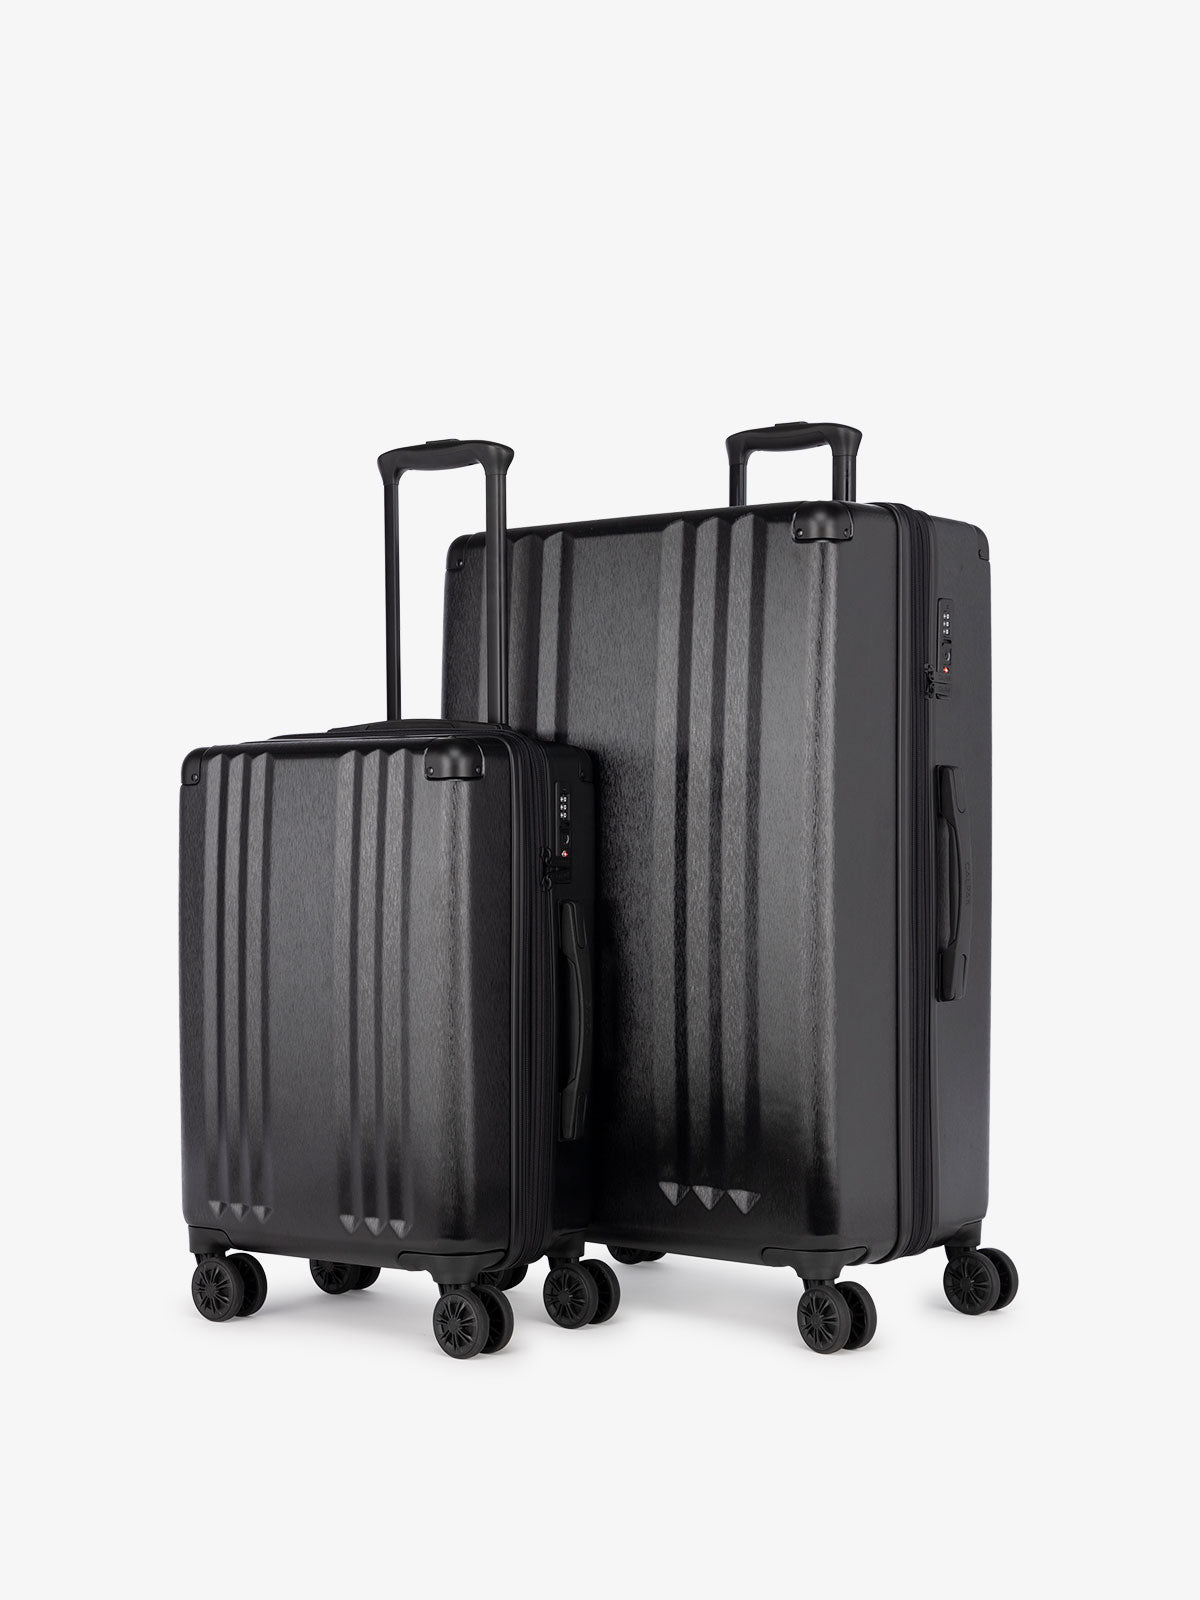 CALPAK Ambeur: 2 piece lightweight expandable black hard shell luggage set with carry on